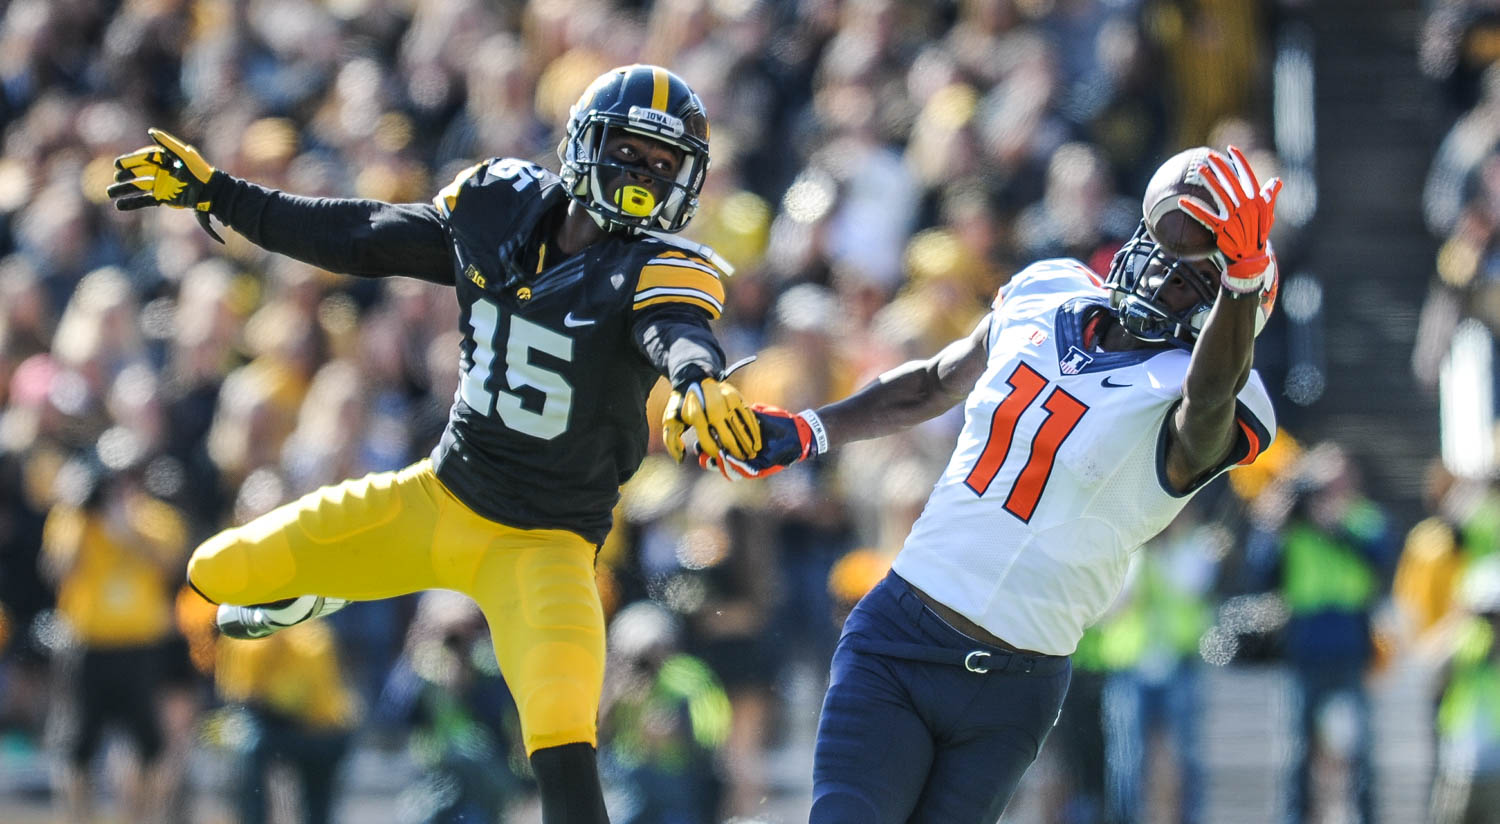 Illinois wide receiver Malik Turner eyes a catch ahead of Iowa defender Joshua Jackson during the first half of their game Saturday, October 10, 2015, at Kinnick Stadium in Iowa City. Iowa defeated the Illlini, 29-20.  (Todd Mizener - Dispatch/Argus)